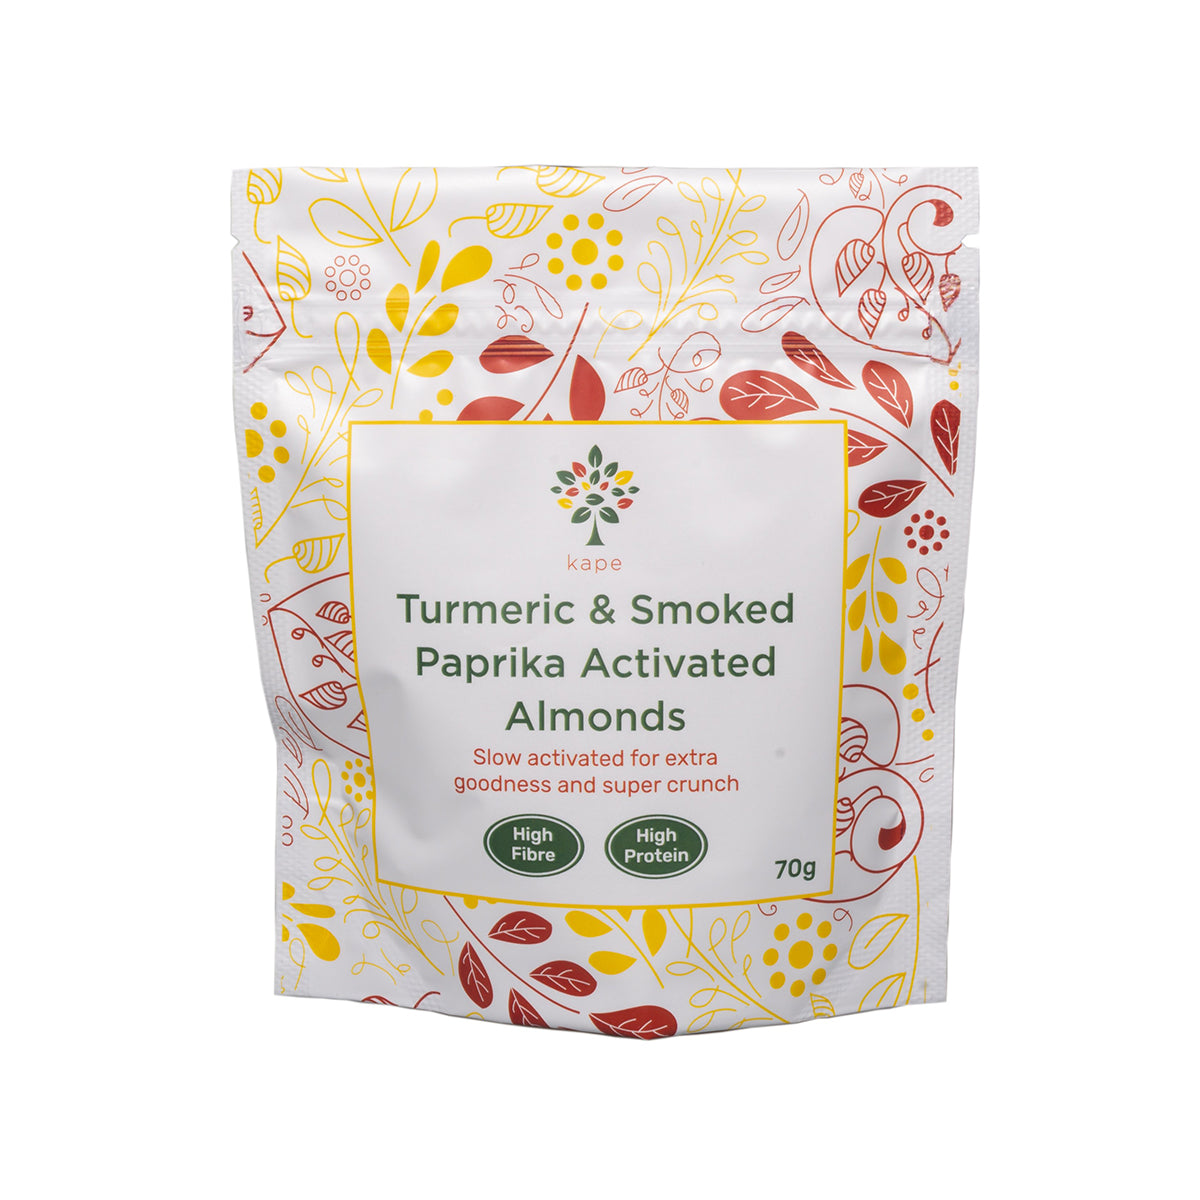 Turmeric and Smoked Paprika Activated Almonds